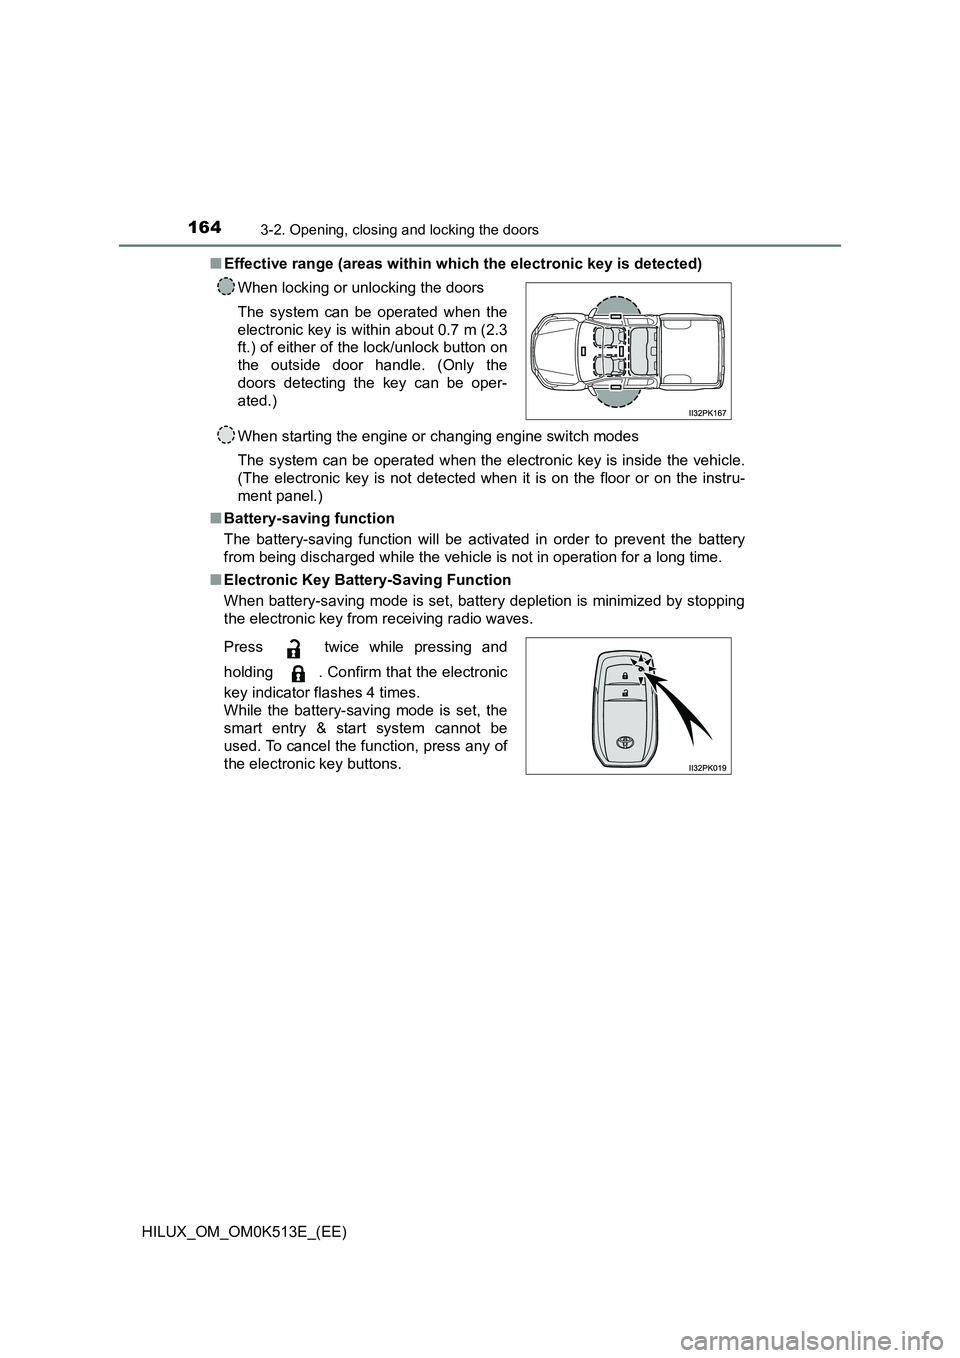 TOYOTA HILUX 2021  Owners Manual (in English) 1643-2. Opening, closing and locking the doors
HILUX_OM_OM0K513E_(EE) 
�Q Effective range (areas within which the electronic key is detected) 
When starting the engine or changing engine switch modes 